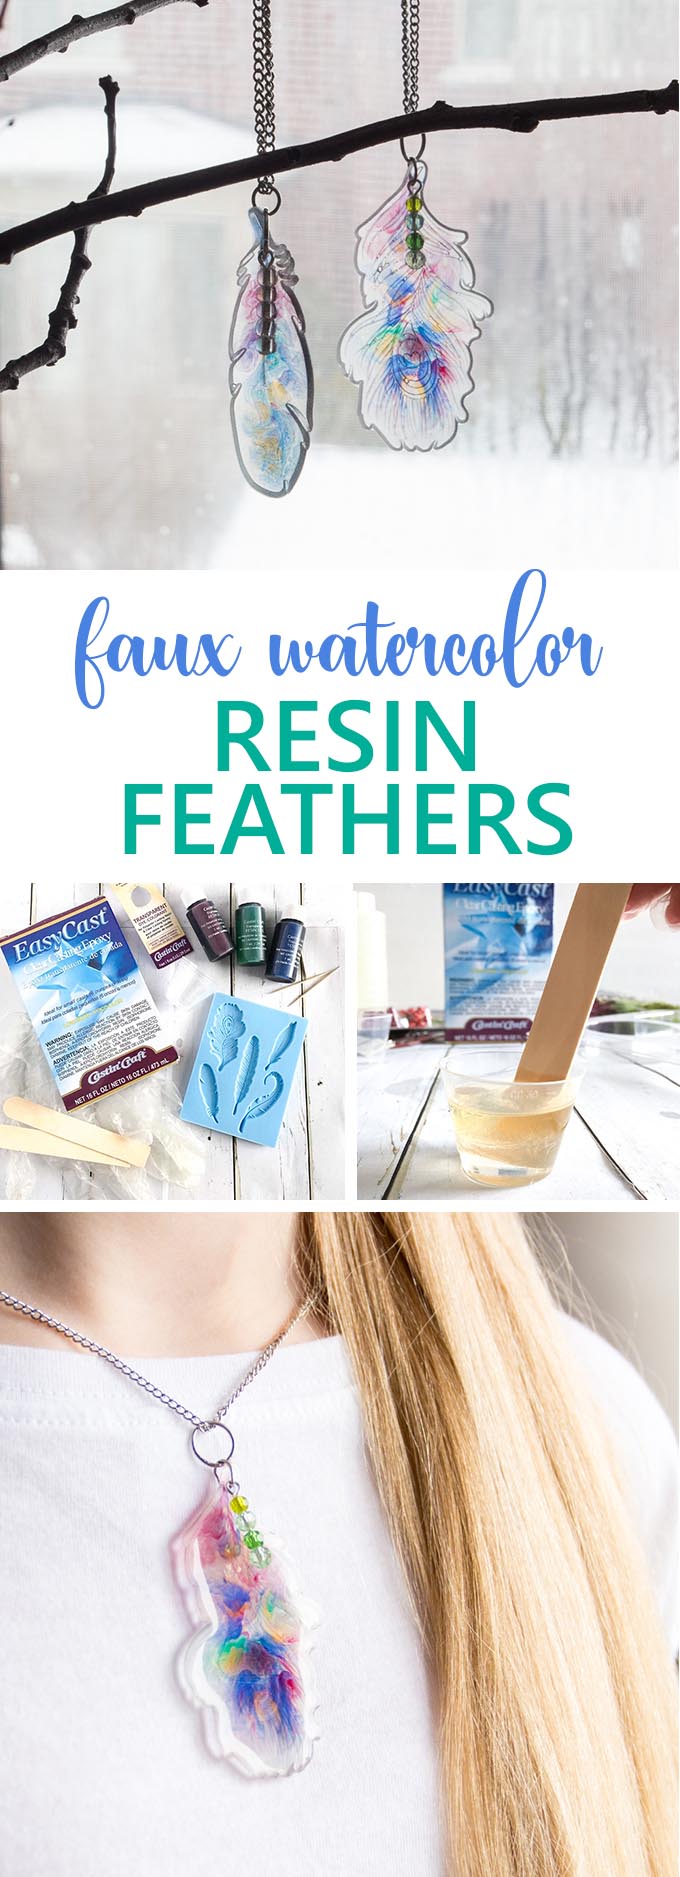 These DIY resin feather pendants are a fun way to add a little nature to your wardrobe. With a faux watercolor effect, these pretty and earthy pendants would make the perfect boho style accessory. #resincrafts #resincraftsblog #bohostyle  via @resincraftsblog